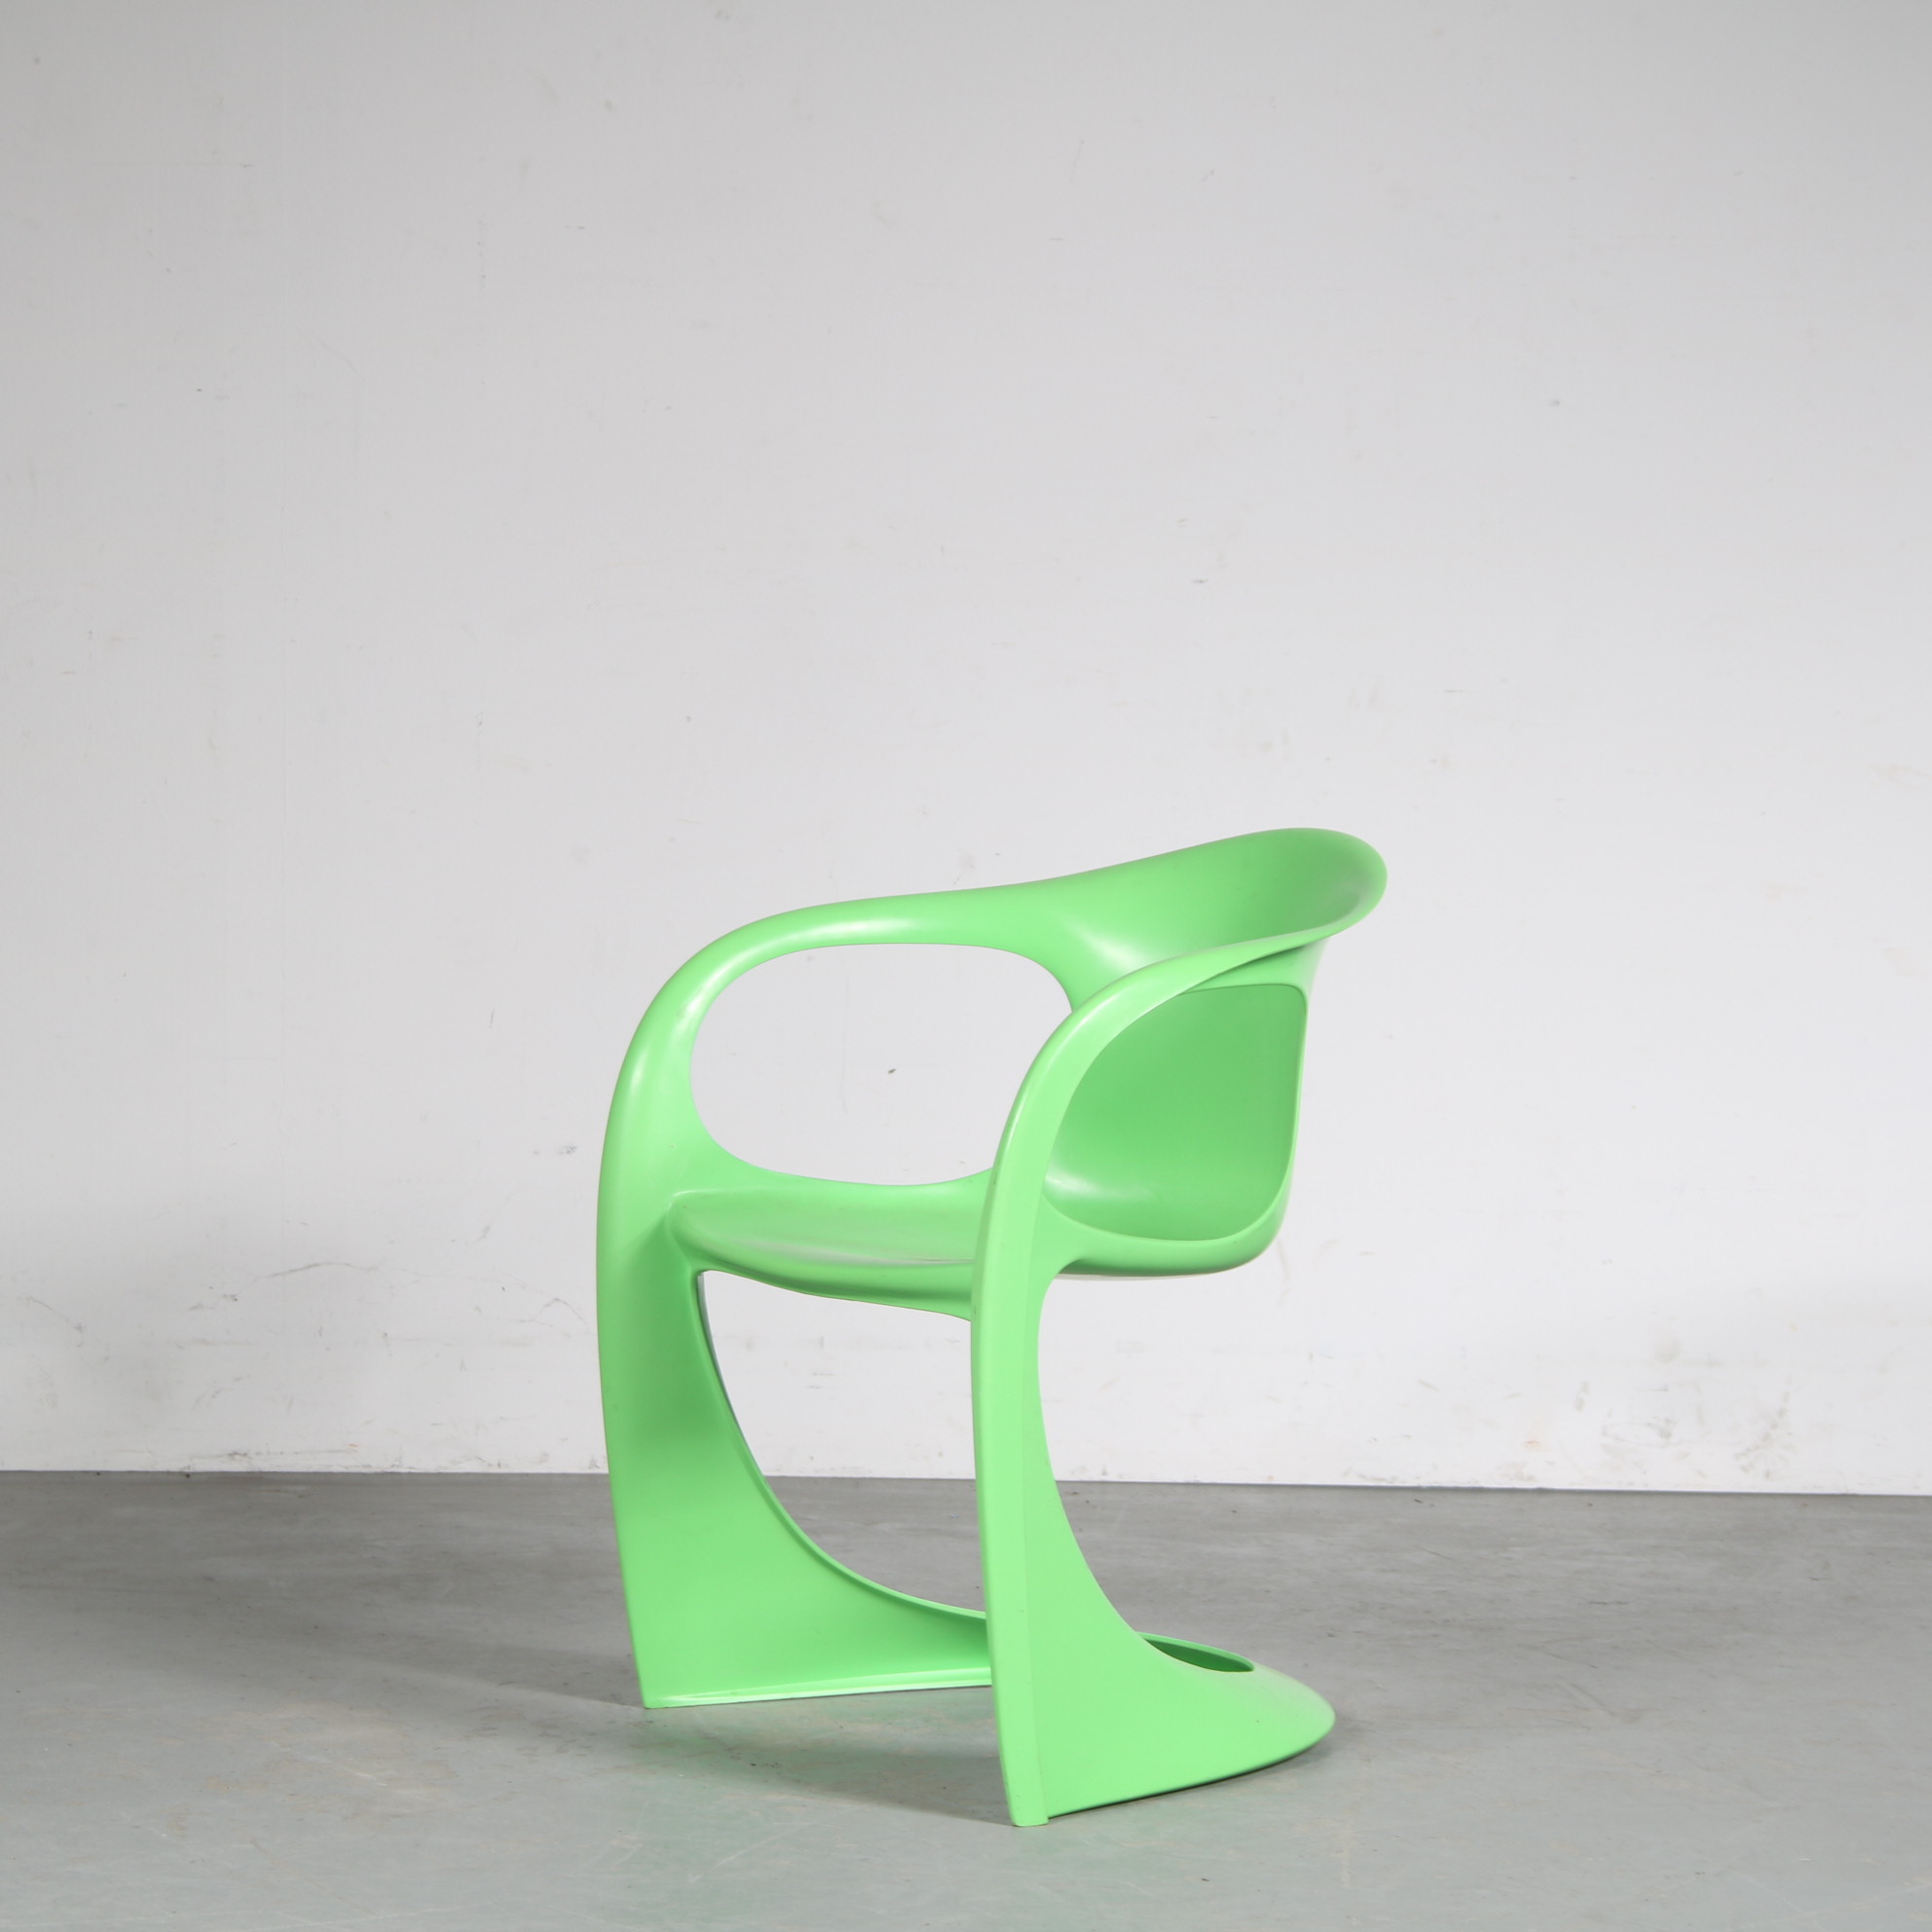 m25962-3 2000s Green plastic "Casalino" chair with armrests (1970s design) Alexander Begge Casala, Germany